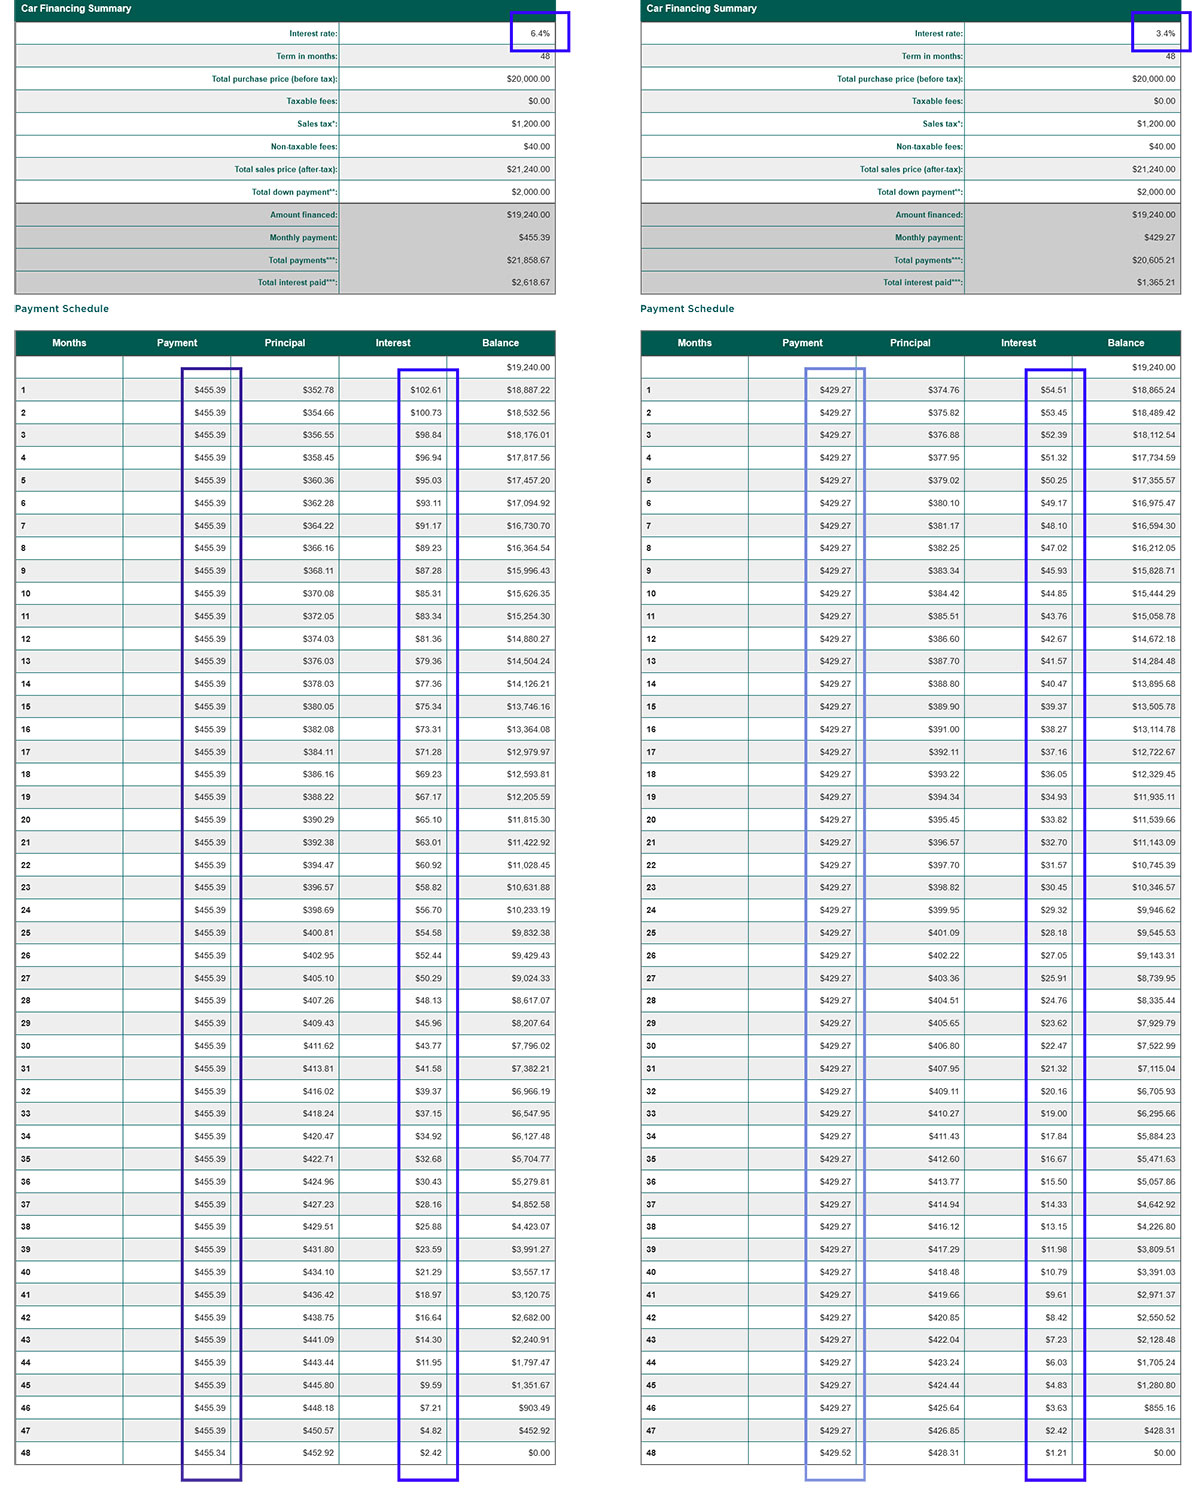 Side-by-side comparison chart with a payment schedule starting at 1 that has $102.61 on the left side interest, and $54.51 on the right-side interest, then proceeds down to payment 36 with $30.43 on the left and $15.50 on the right.